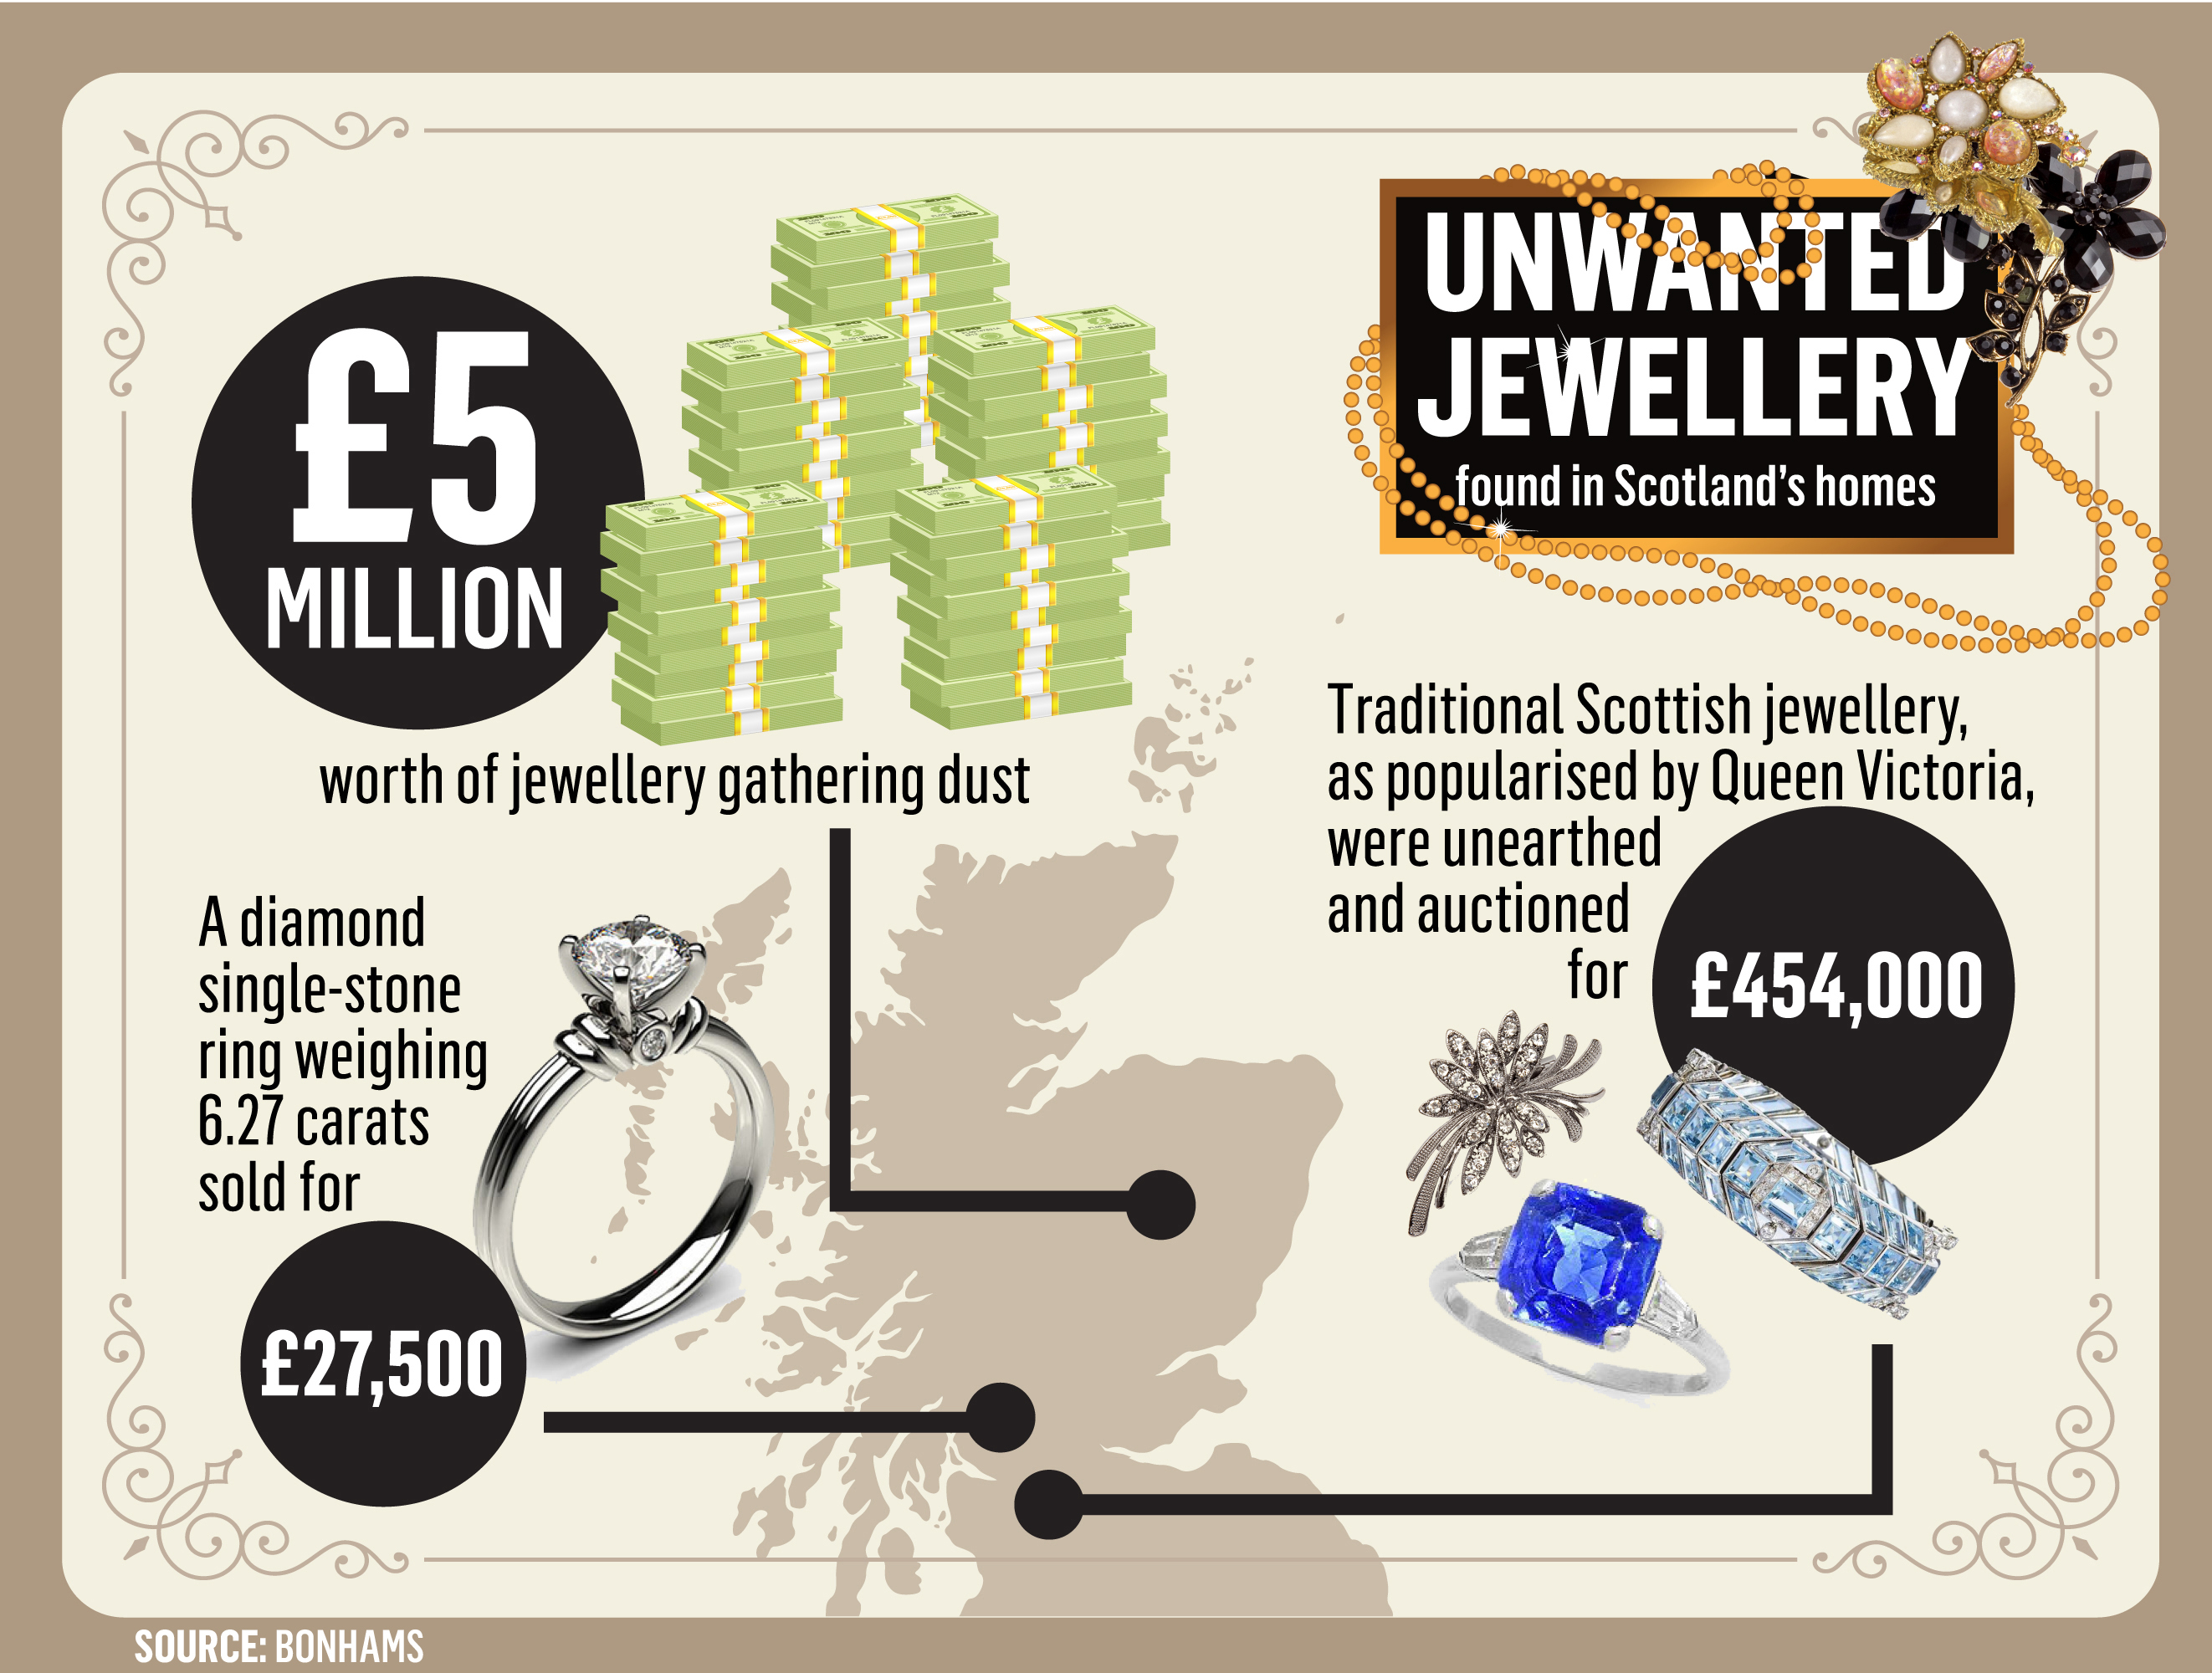 Unwanted jewellery found in Scotland's homes